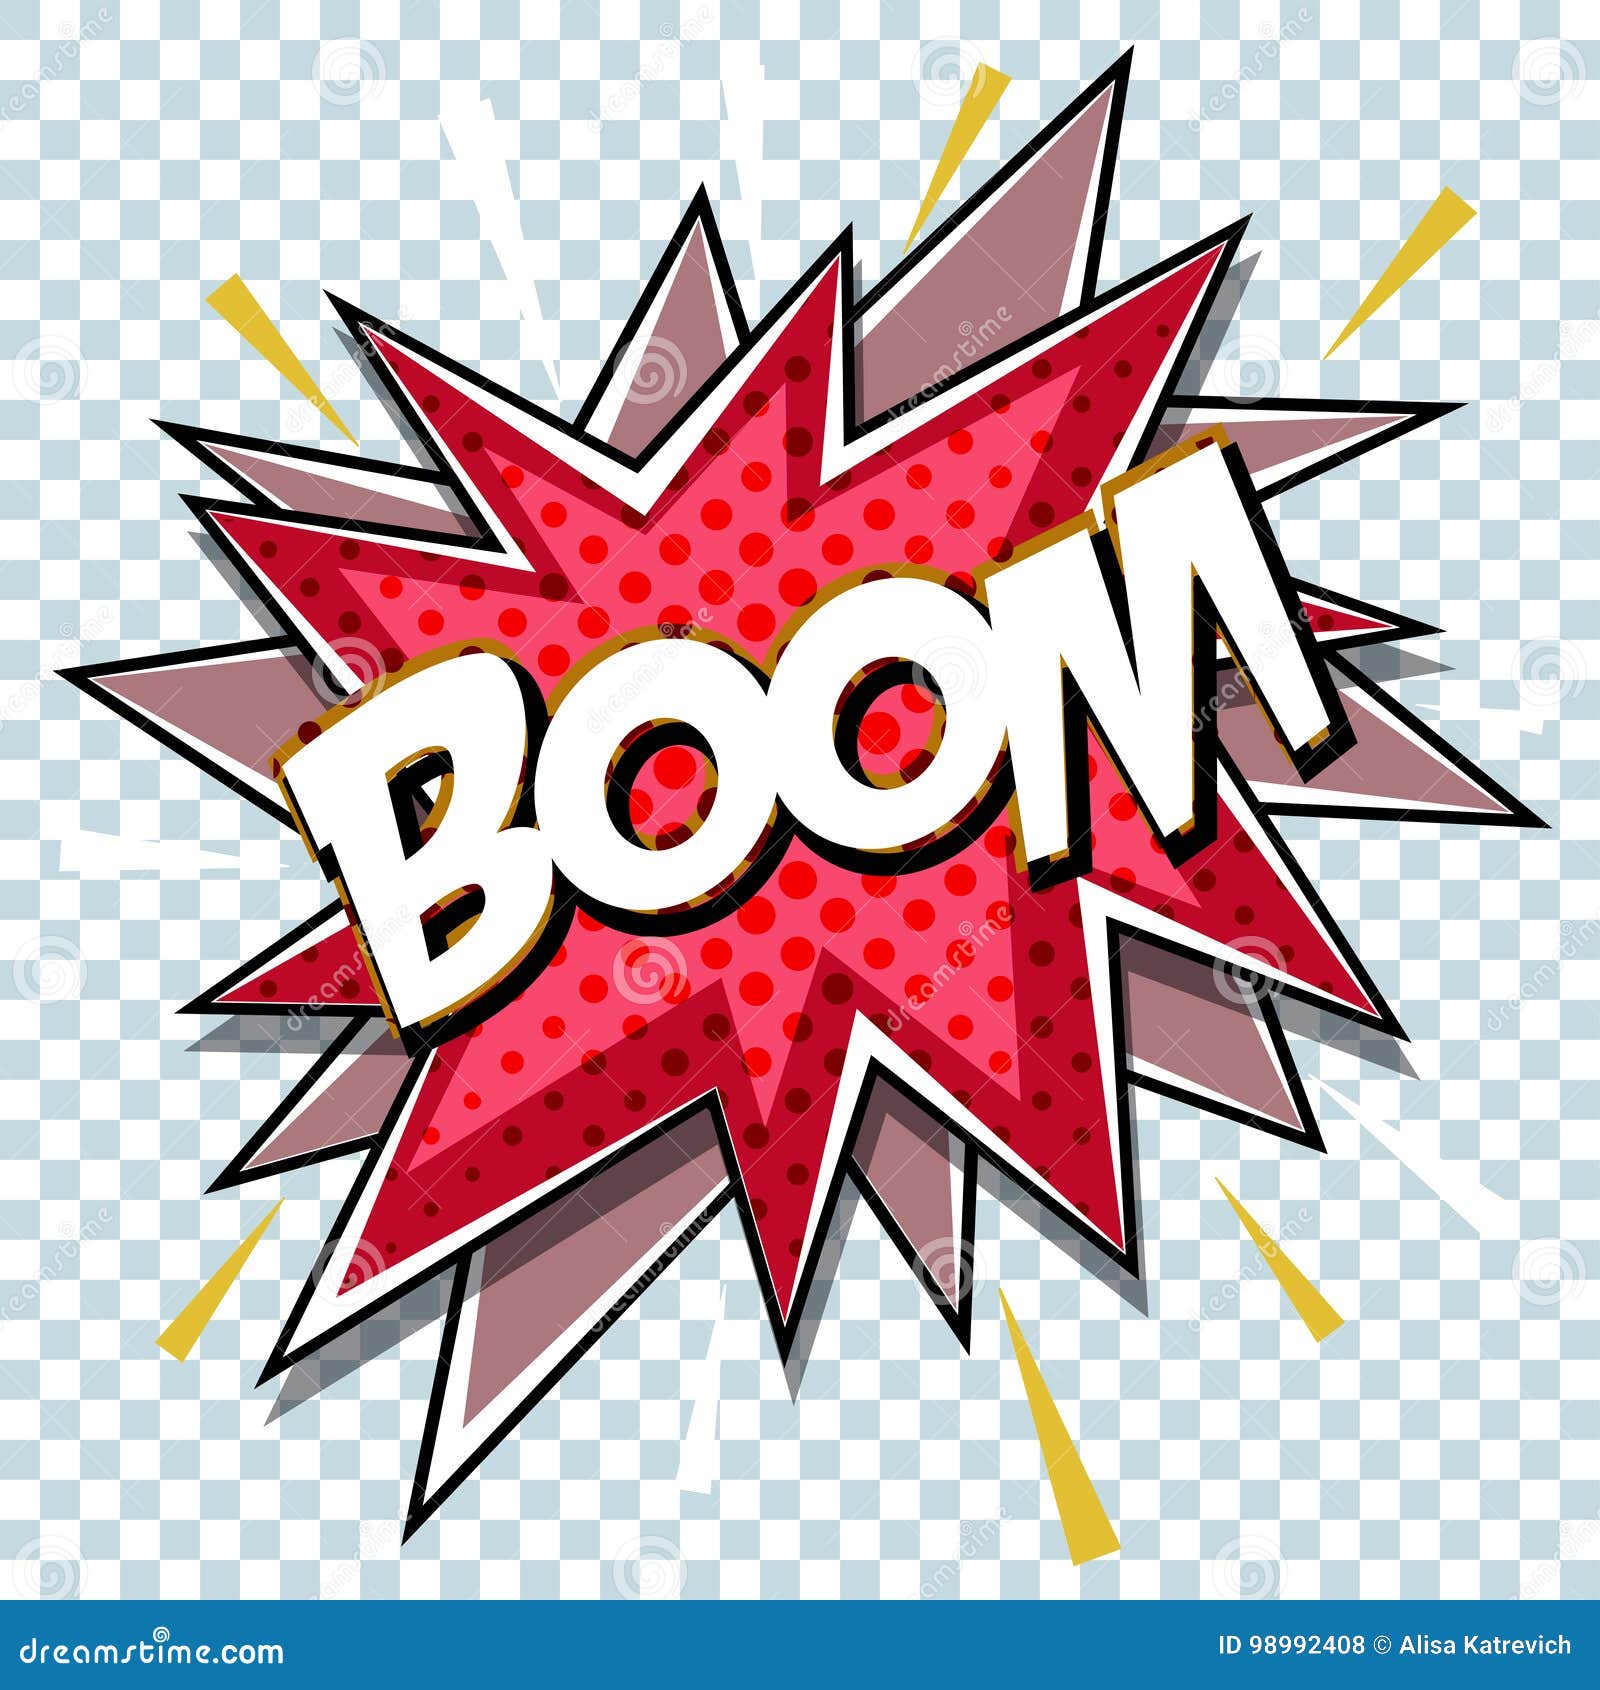 Cartoon Comic Graphic Design for Explosion Blast Dialog Box Background with Sound  BOOM. Stock Vector - Illustration of bomb, sketch: 98992408